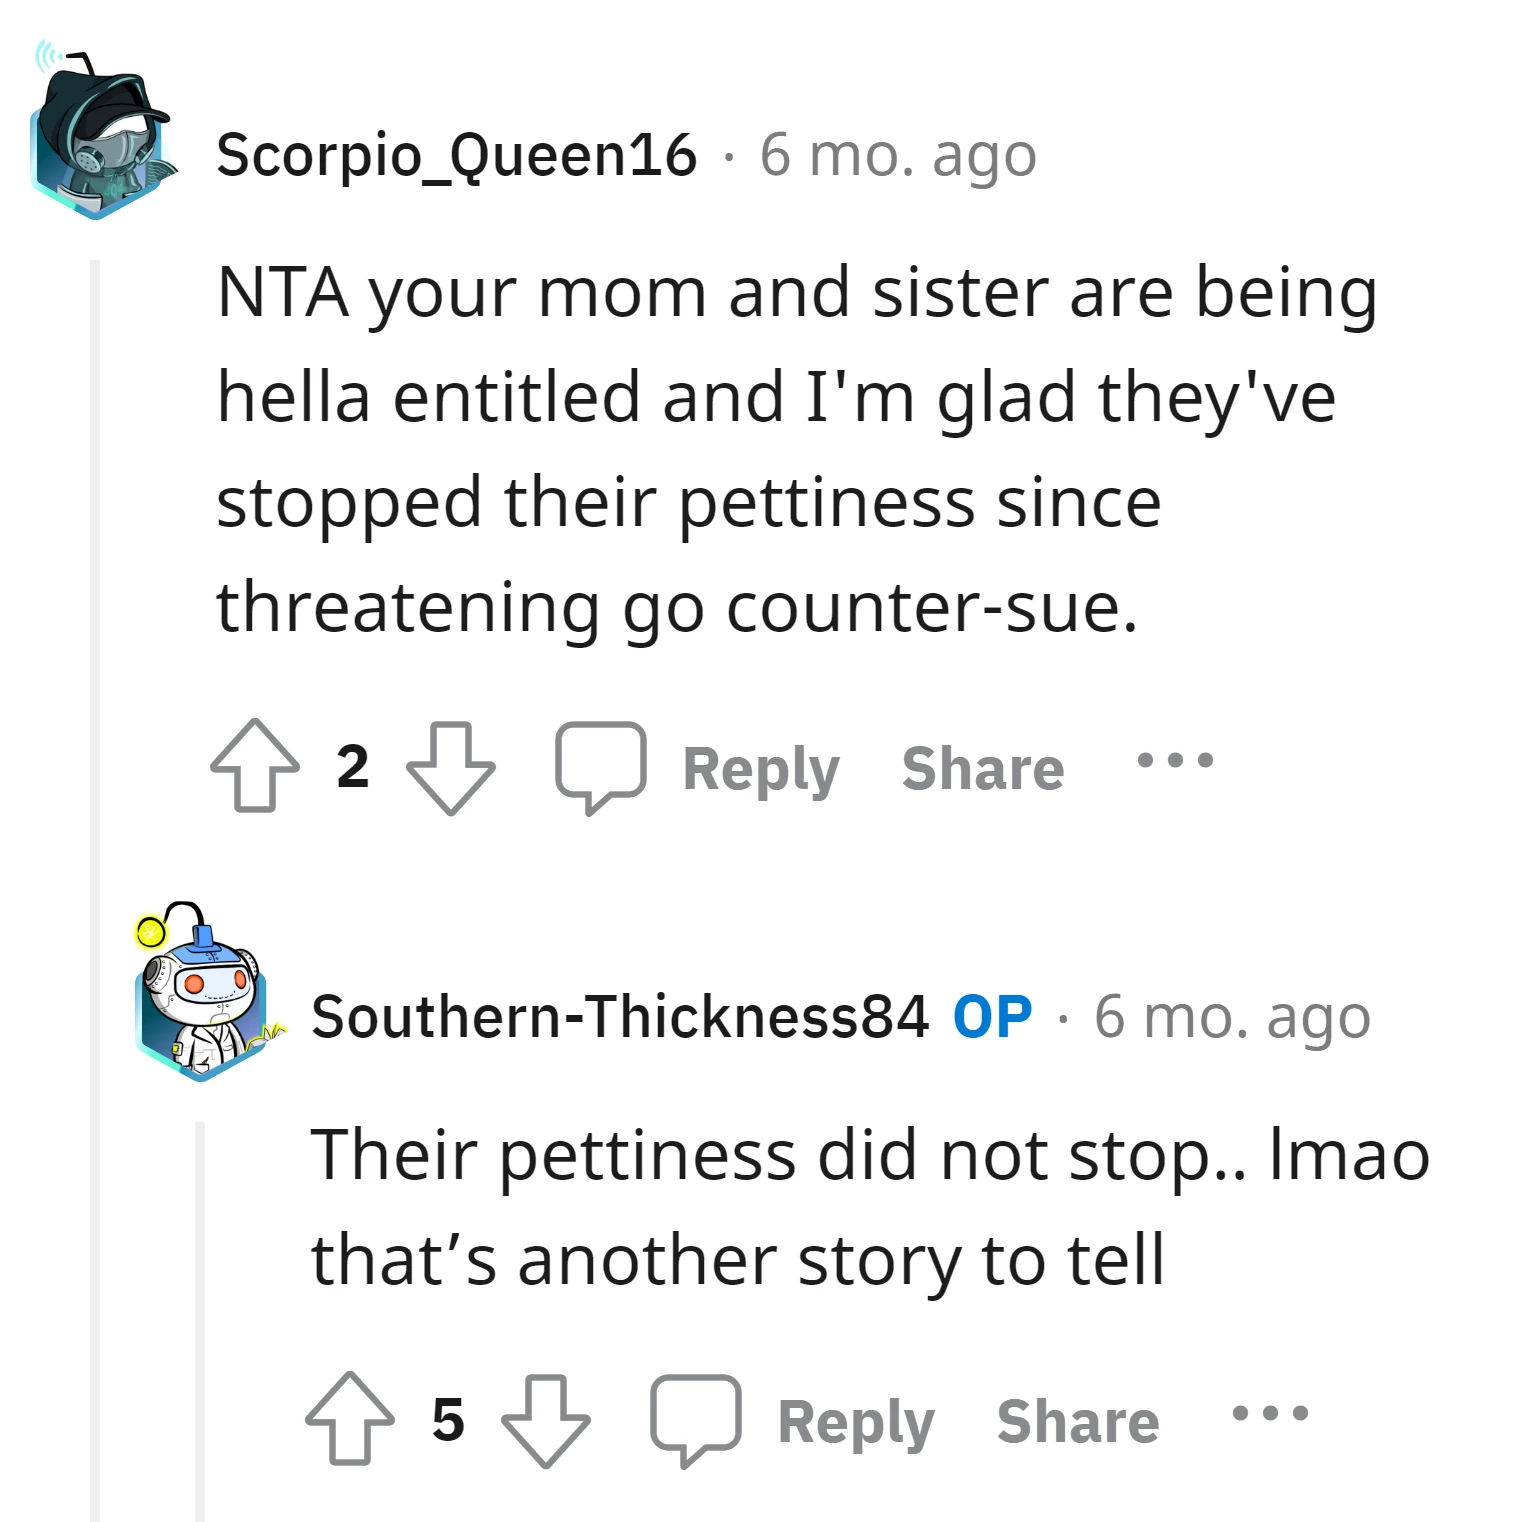 "Their pettiness did not stop"